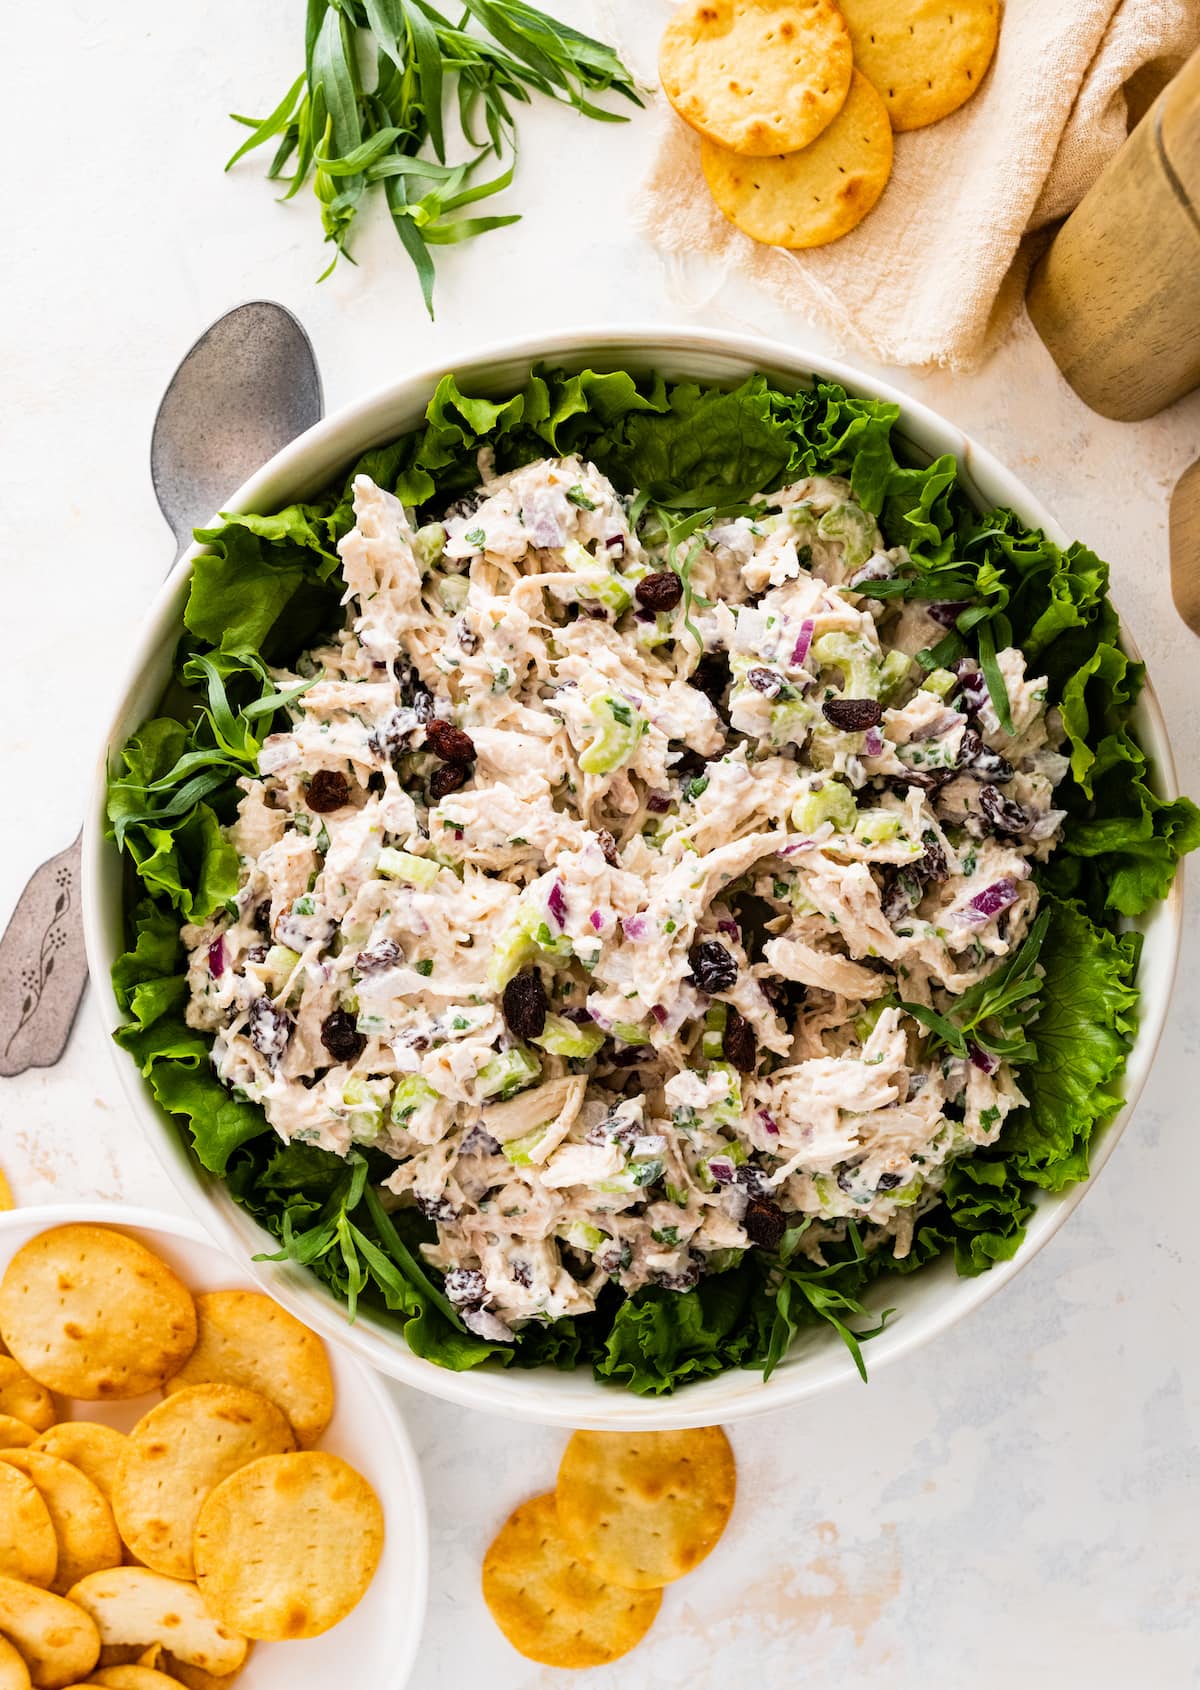 Tarragon chicken salad in a white serving bowl served on top of a bed of greens.